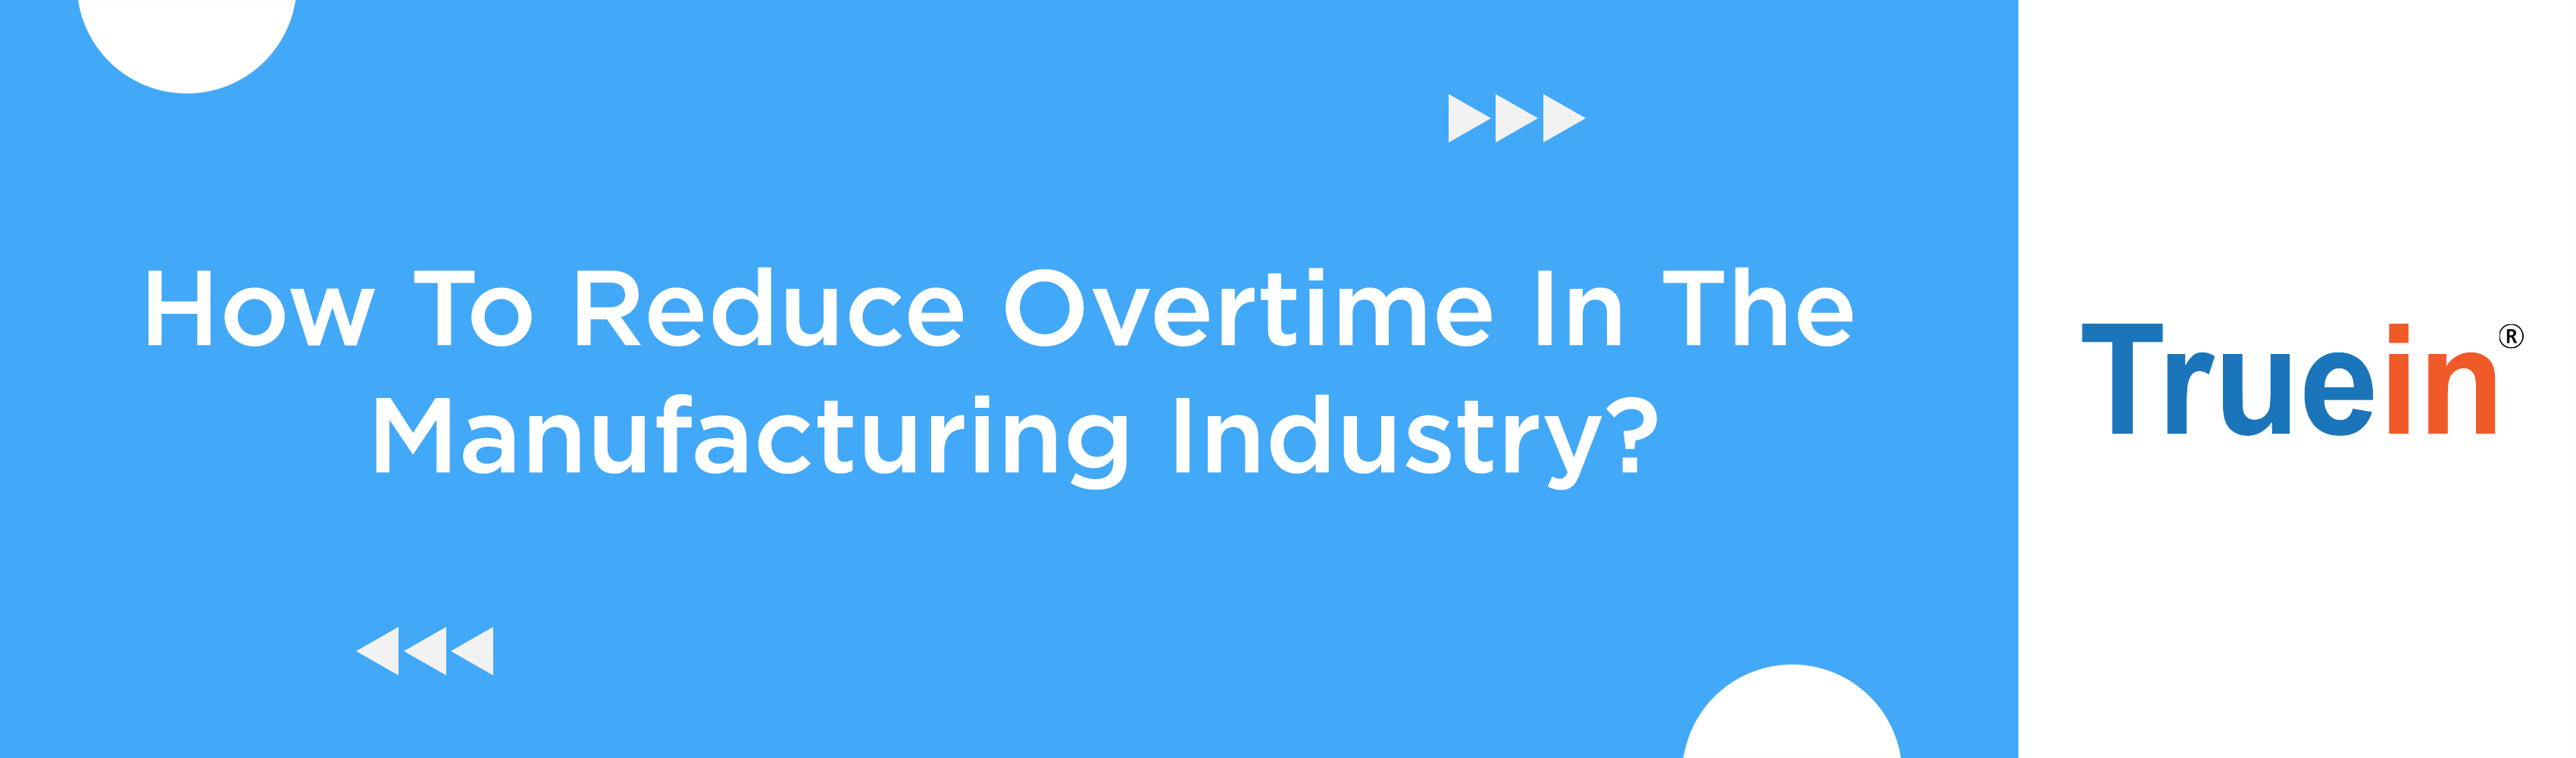 How To Reduce Overtime In The Manufacturing Industry?